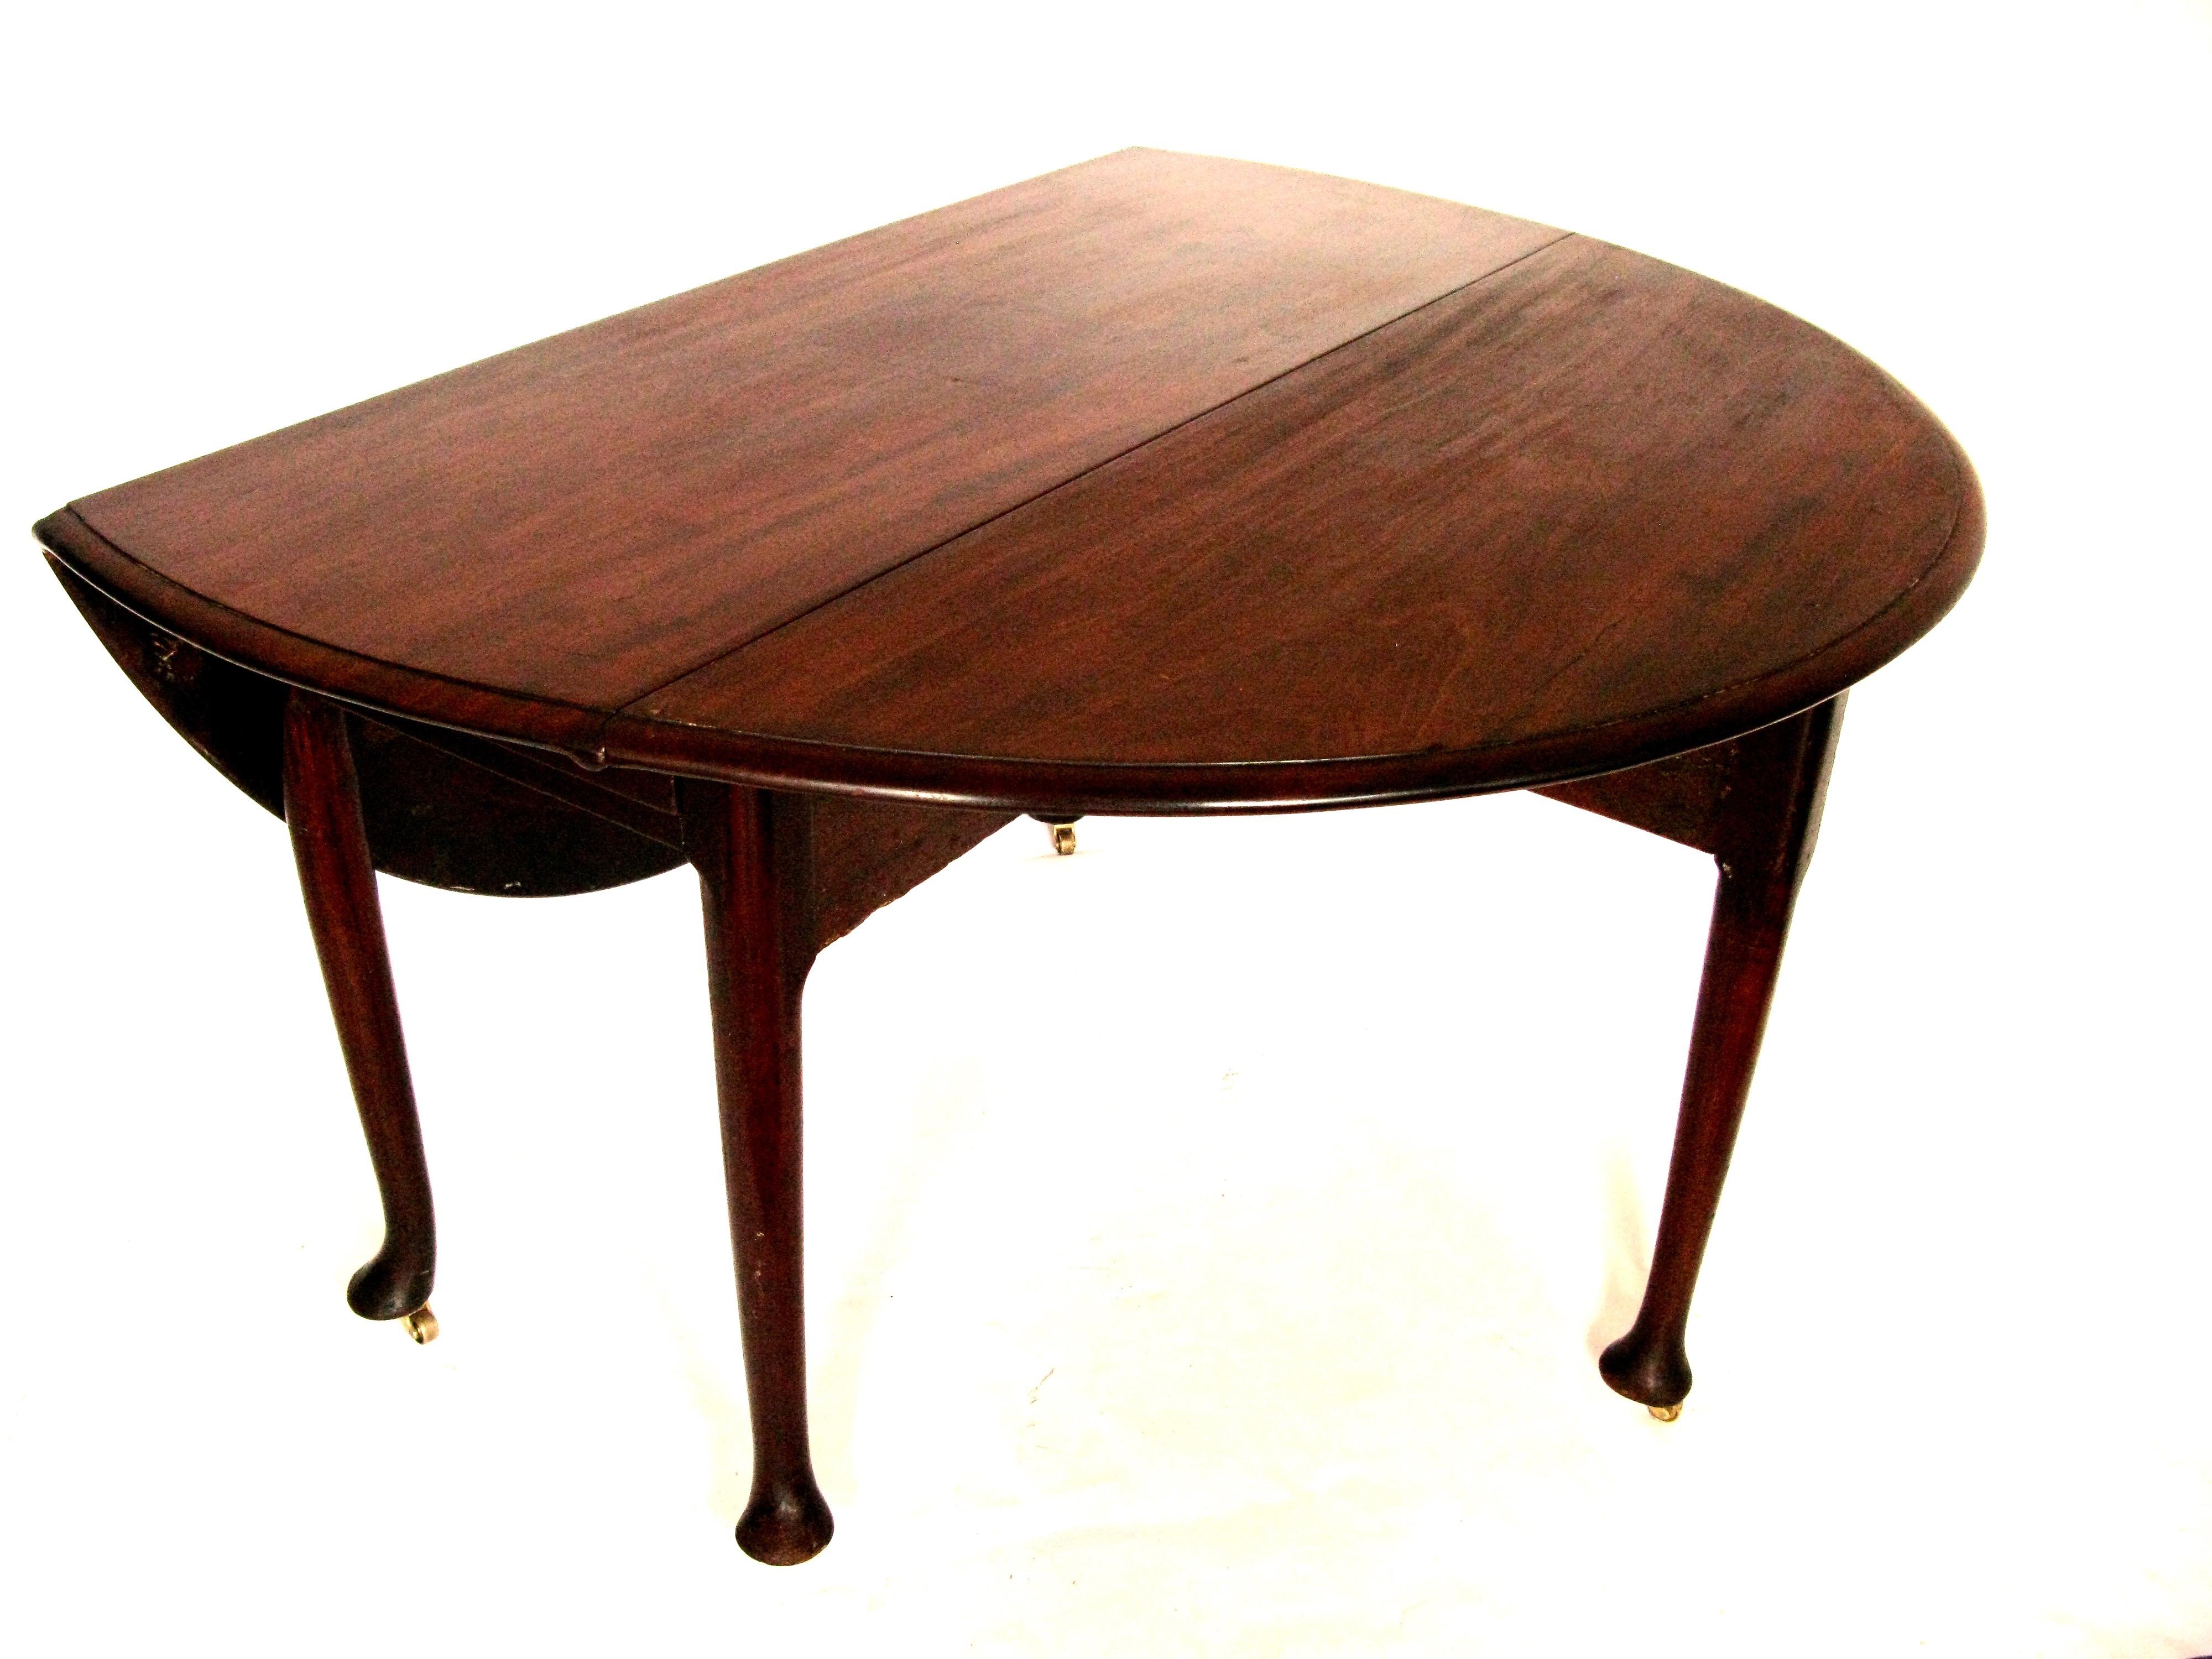 George III mahogany drop-leaf dining table, circa 1760. With solid mahogany top and leaves with curved edges, standing on 4 legs which finish on a simple pad foot with castors to ease to use the table. One pair of legs swing out on wooden hinges to